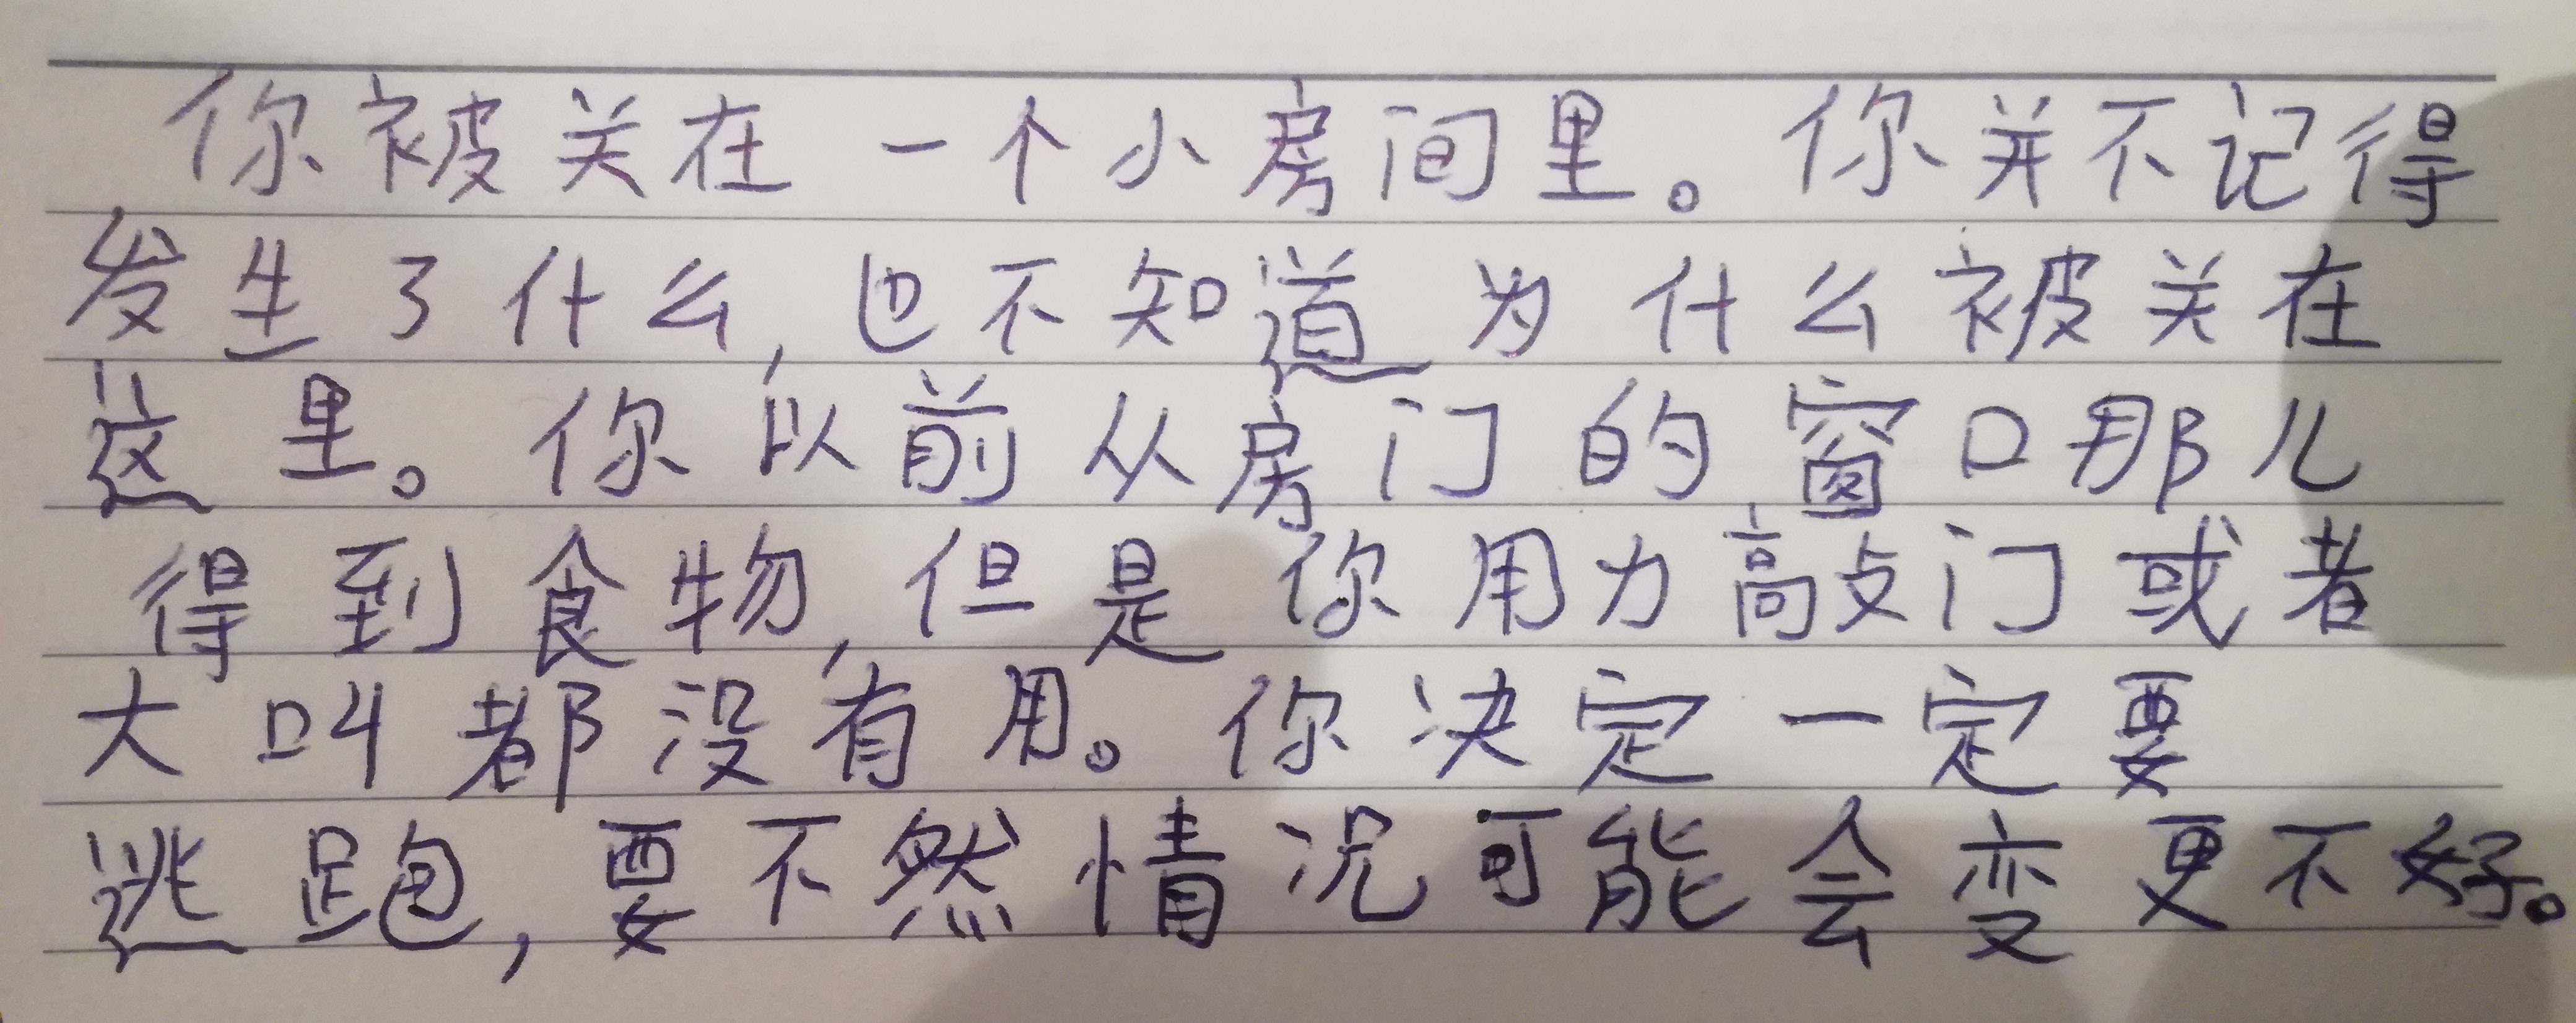 best-letter-format-chinese-letter-format-in-english